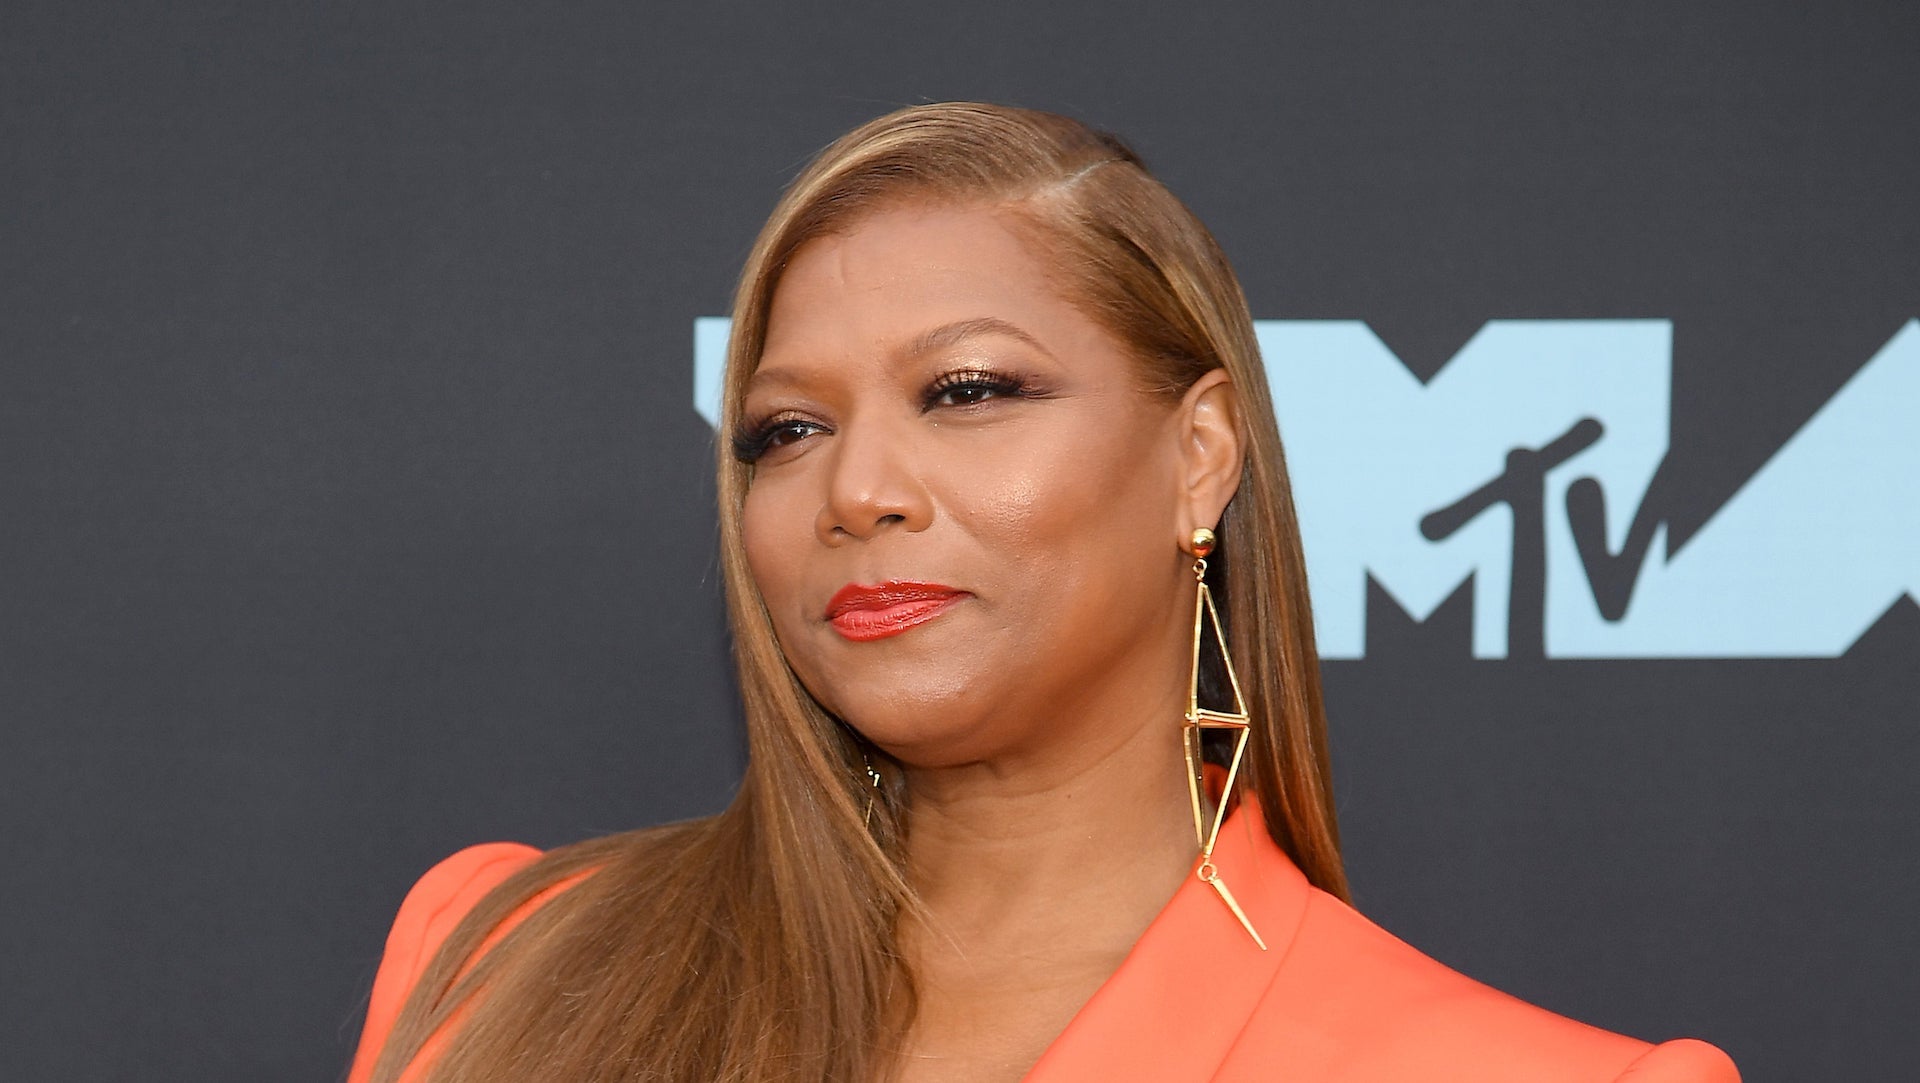 Queen Latifah Said Bullets Were Her Must-Have Item During Self-Isolation